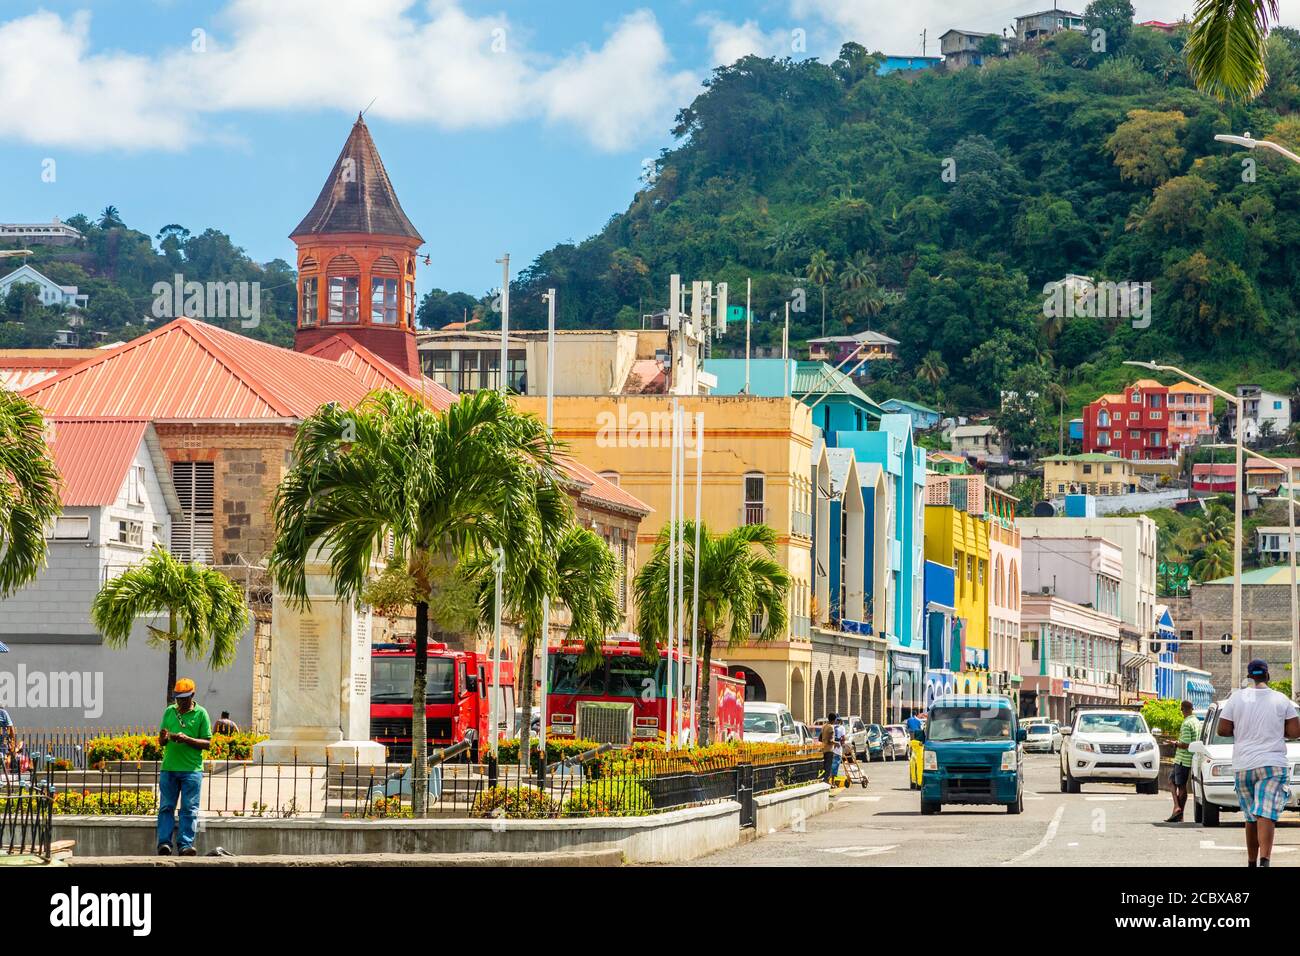 City center of caribbean town  Kingstown, Saint Vincent and the Grenadines Stock Photo